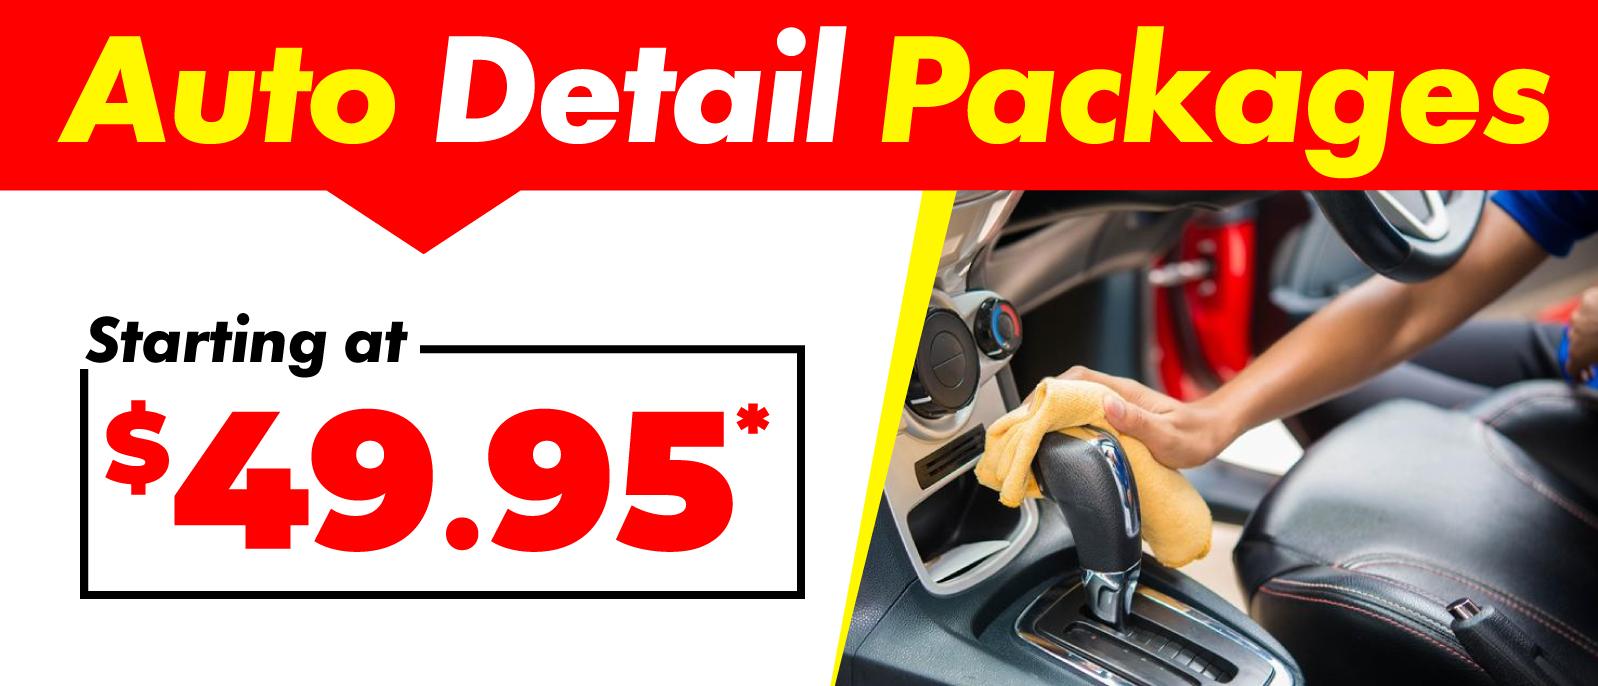 Auto Detail Packages starting at $49.95*